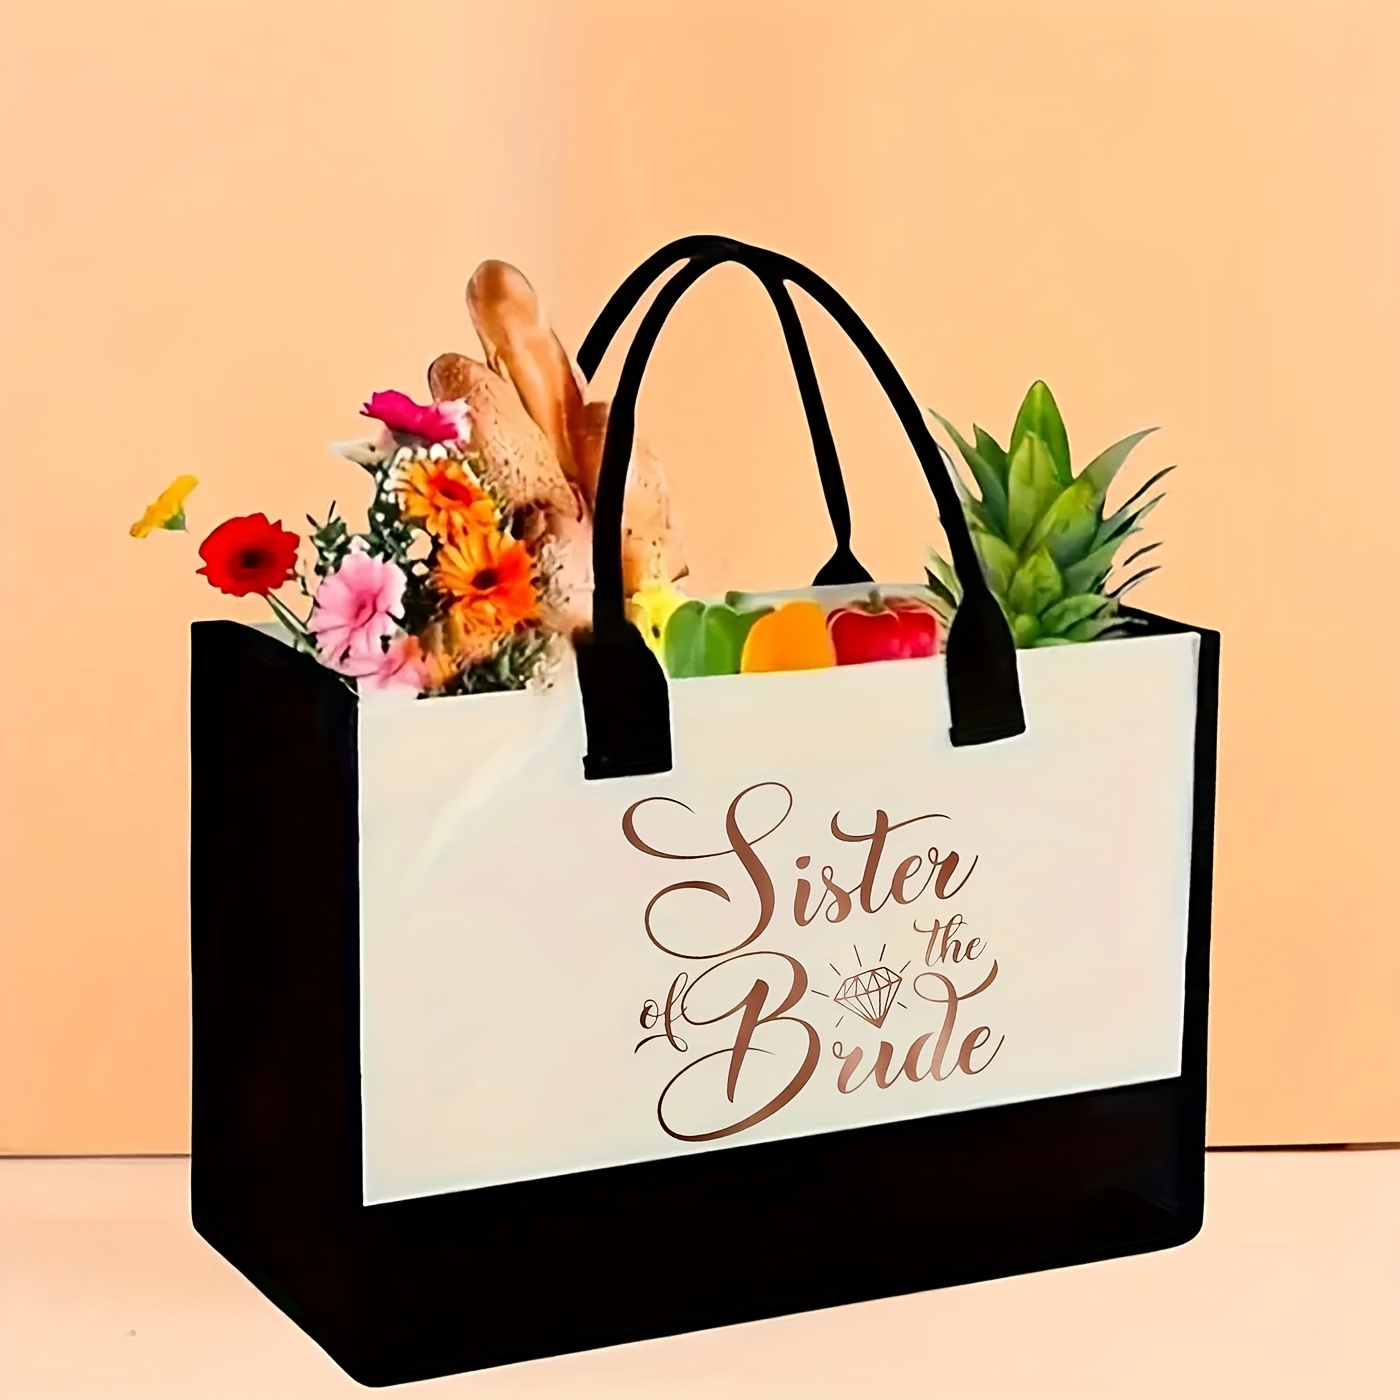 Sister of the bride women's gifts' Tote Bag